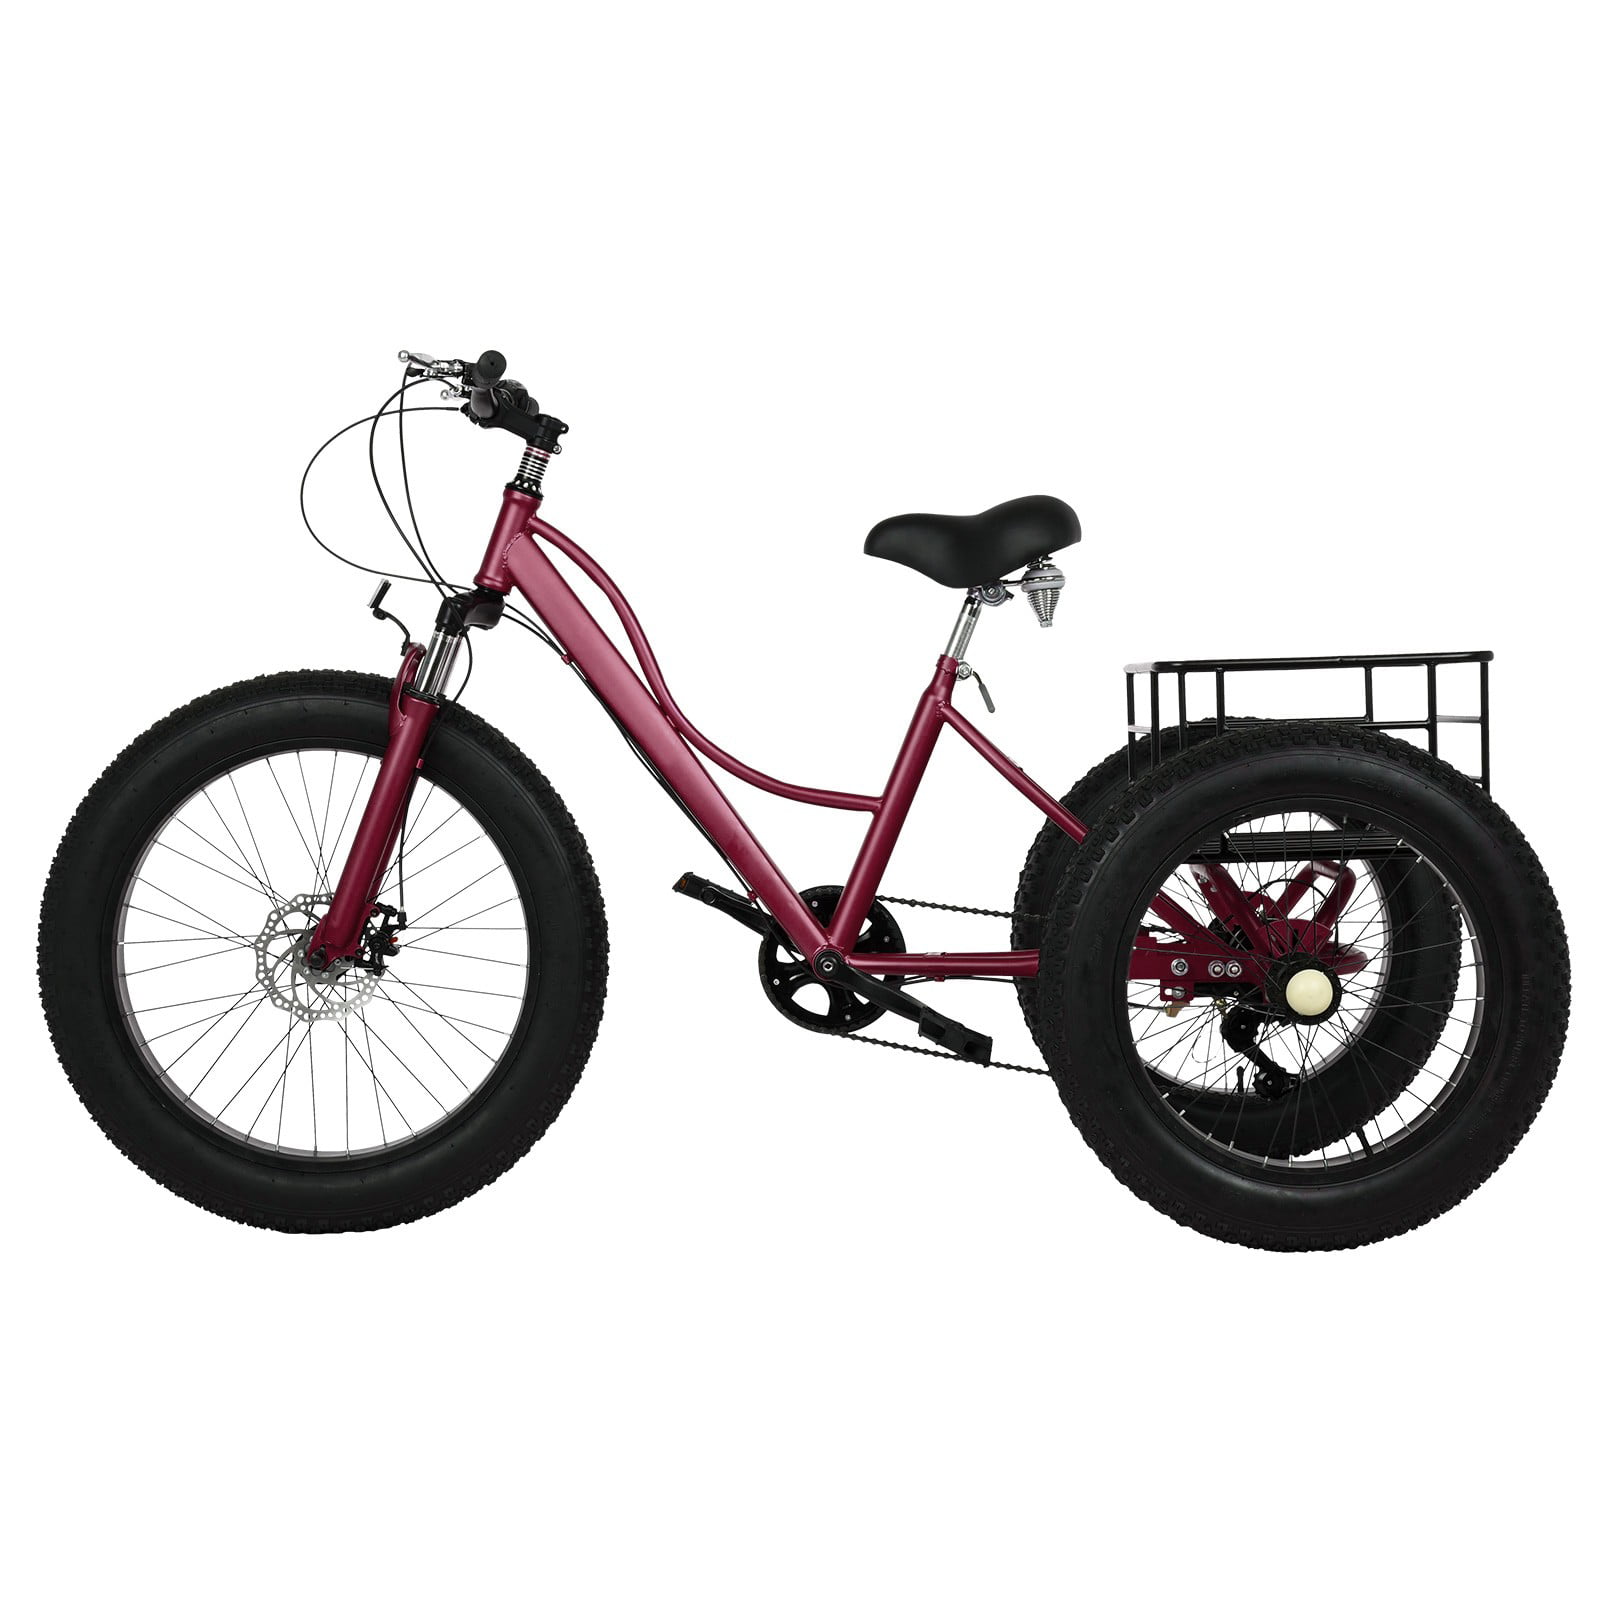 Adult Bicycles for Men 24 Inch Front Wheel 20 Inch Rear Wheel Trike Tricycle Bike for Adults Heavy Duty Fat Tire Bike Tricycle for Adult: 7 Speed Bike with Cargo Basket 